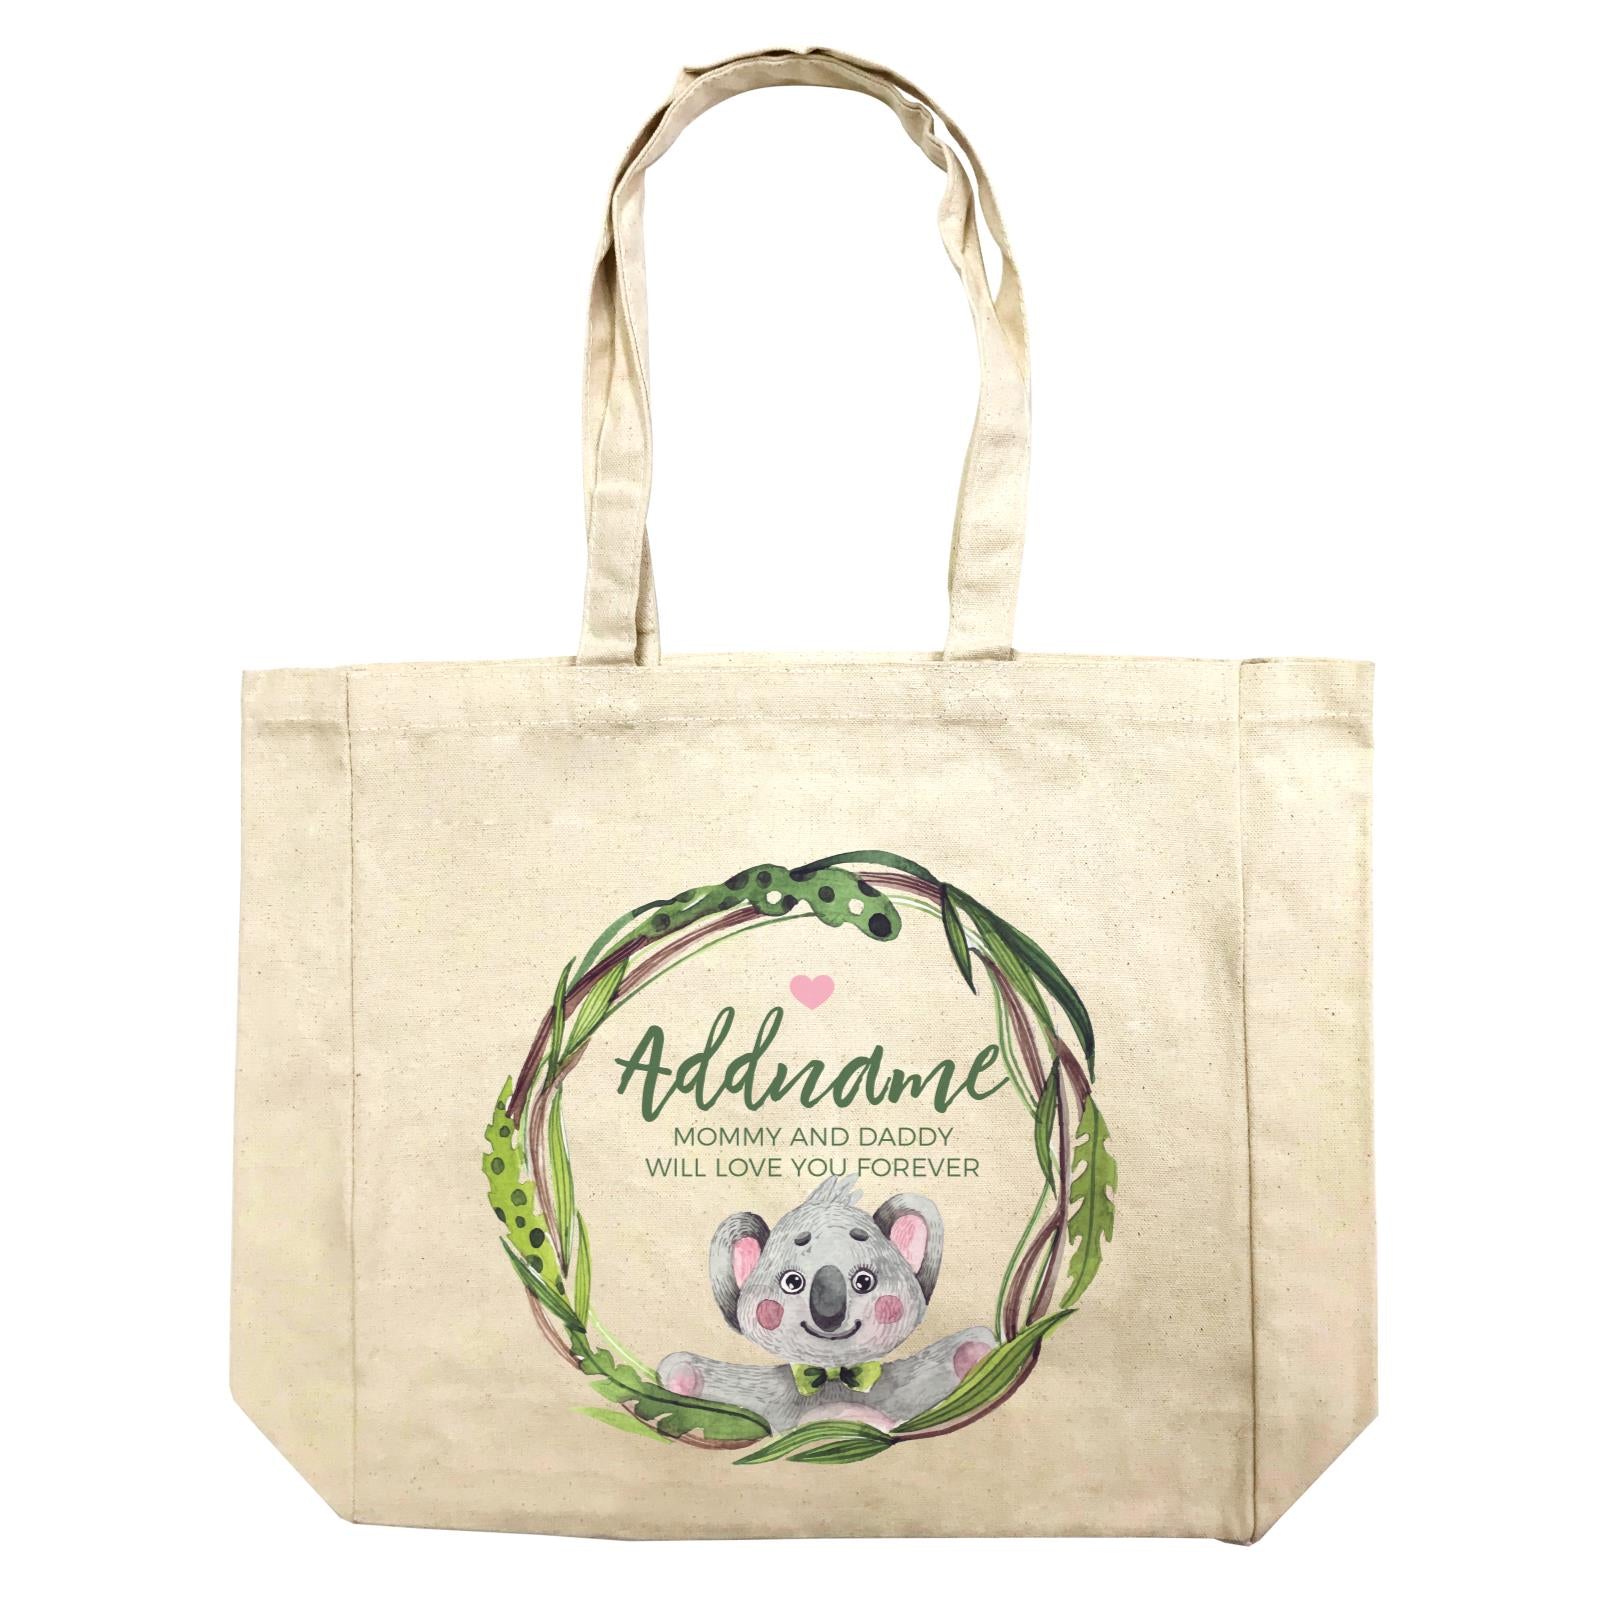 Watercolour Pink Koala Green Leaves Wreath Personalizable with Name and Text Shopping Bag